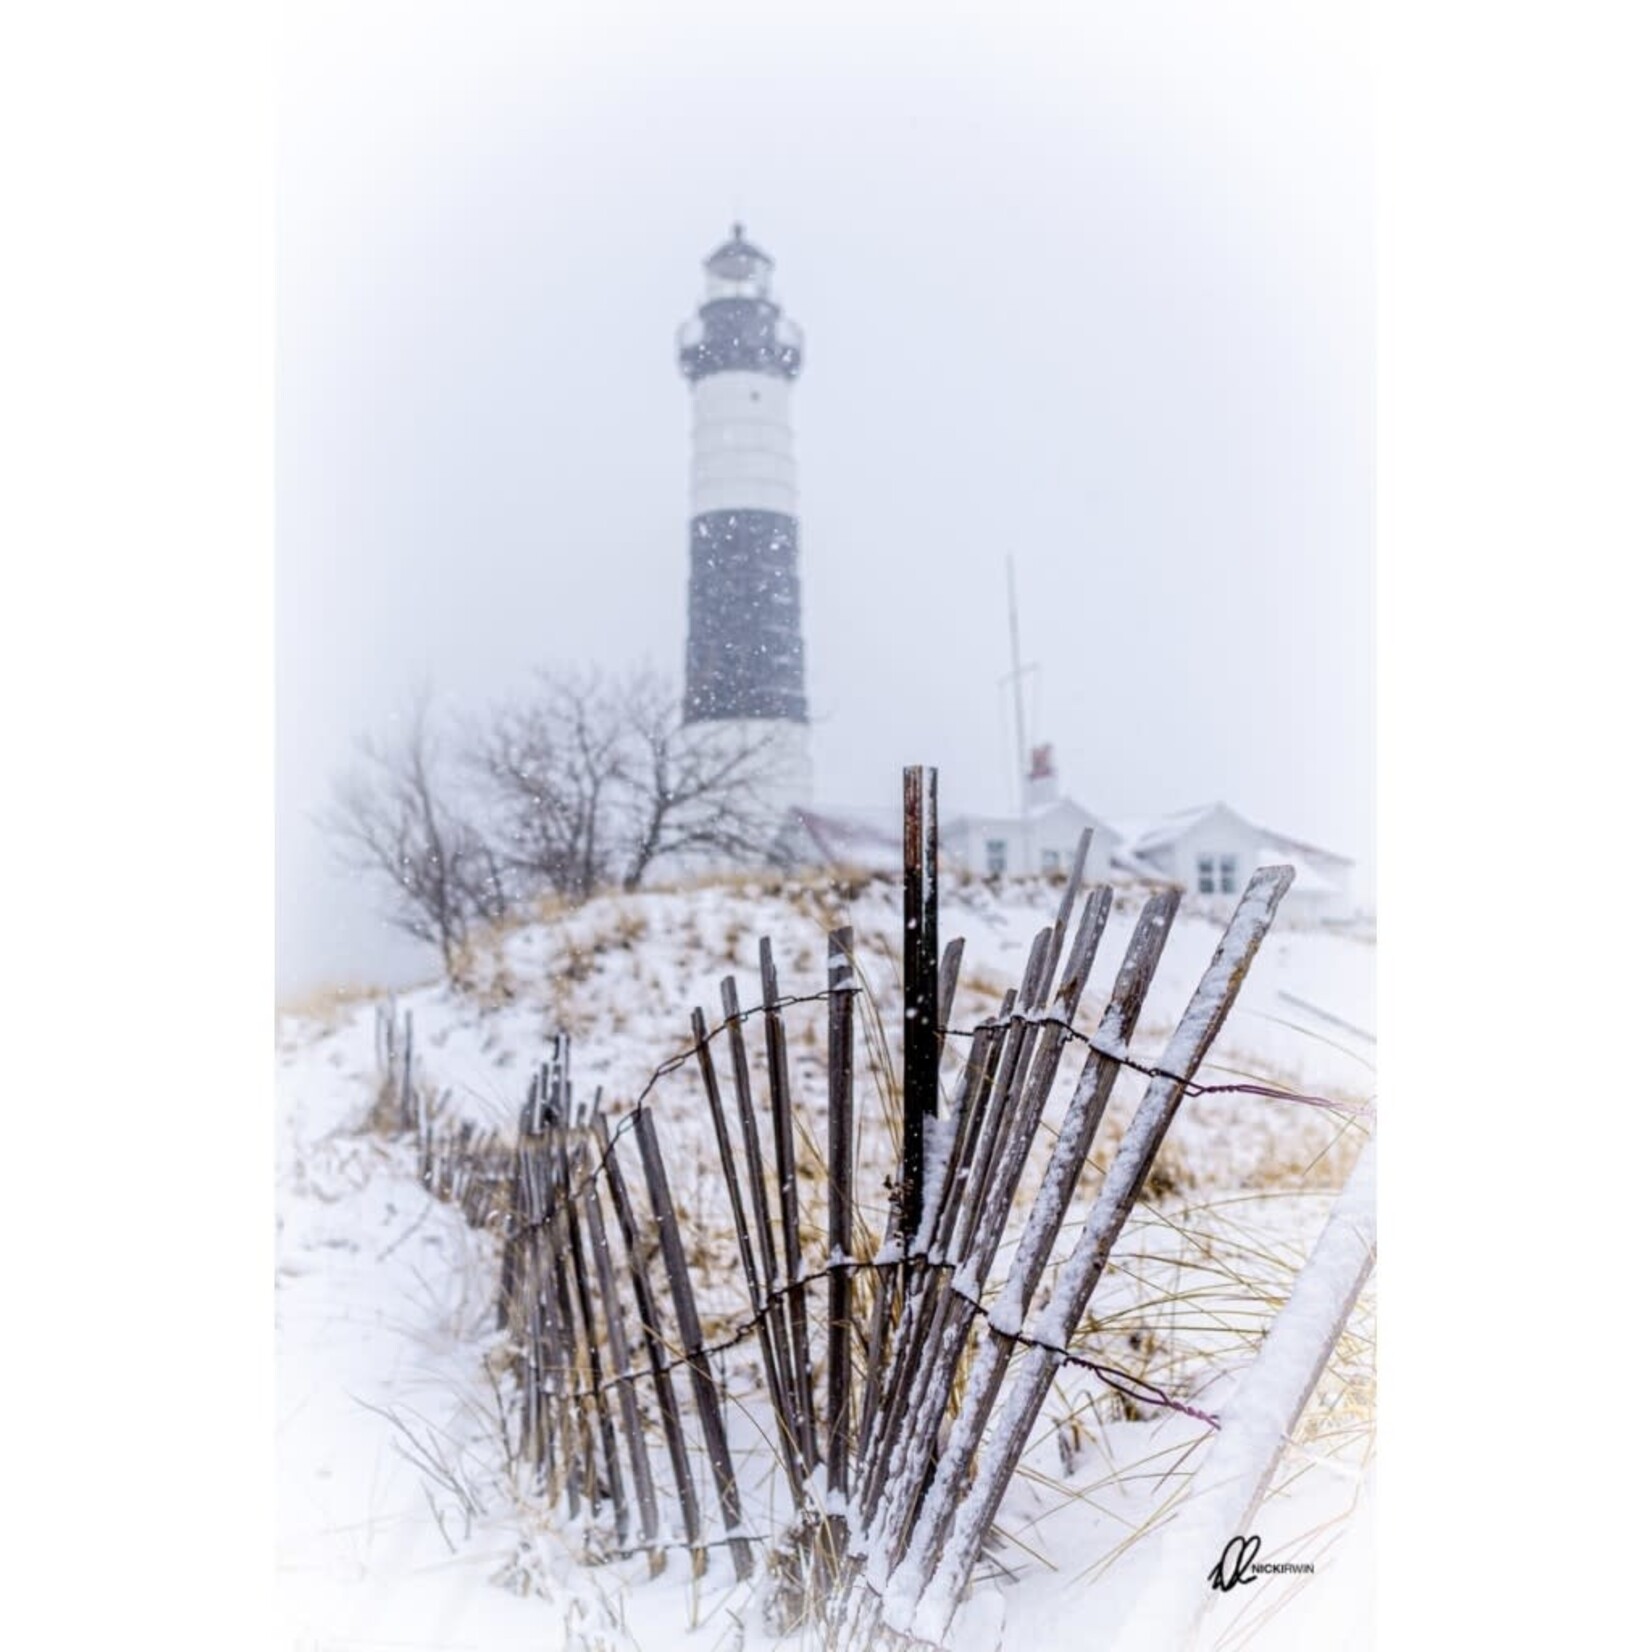 Nick Irwin Images Big Sable Lighthouse in Winter